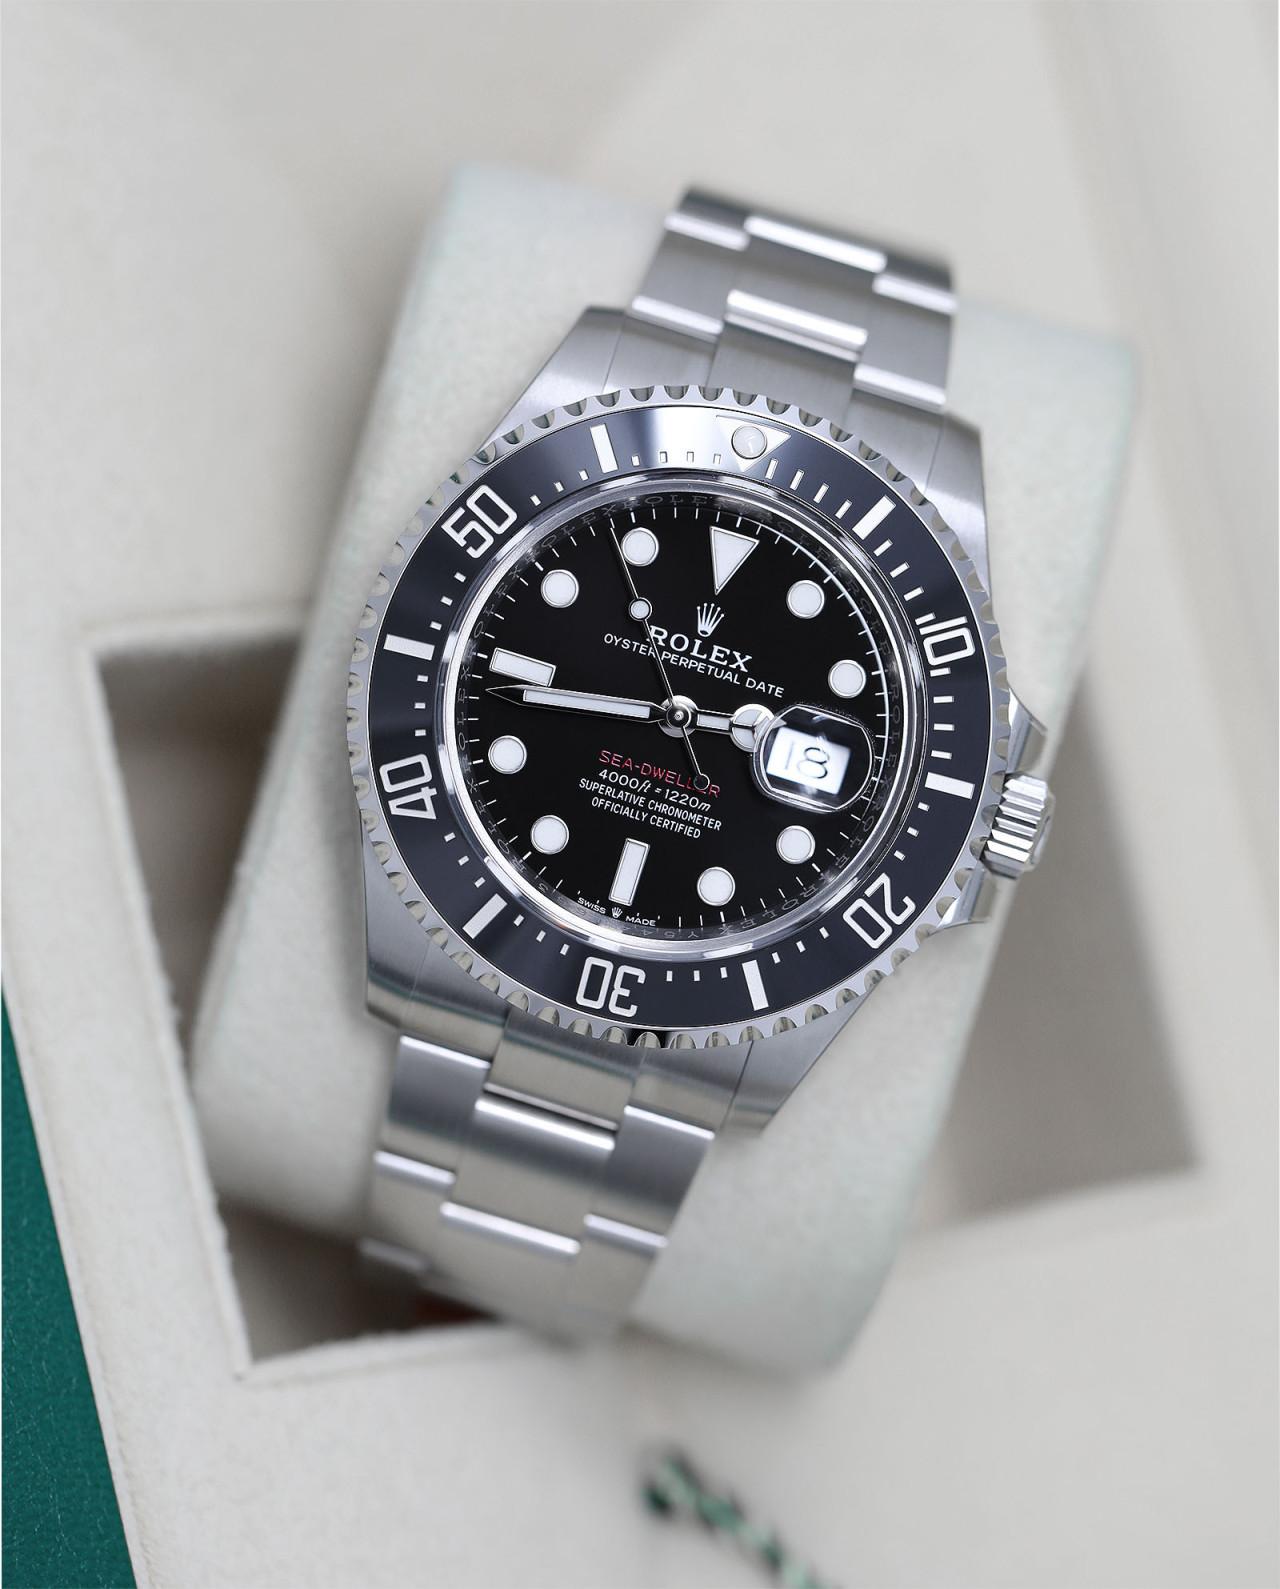 Rolex Sea-Dweller 43mm Stainless Steel Watch Black Dial 126600 

We are a premiere distributor of pre-owned and new watches, where we guarantee complete authenticity and corresponding aesthetic to all of our timepieces. We guarantee the watch you